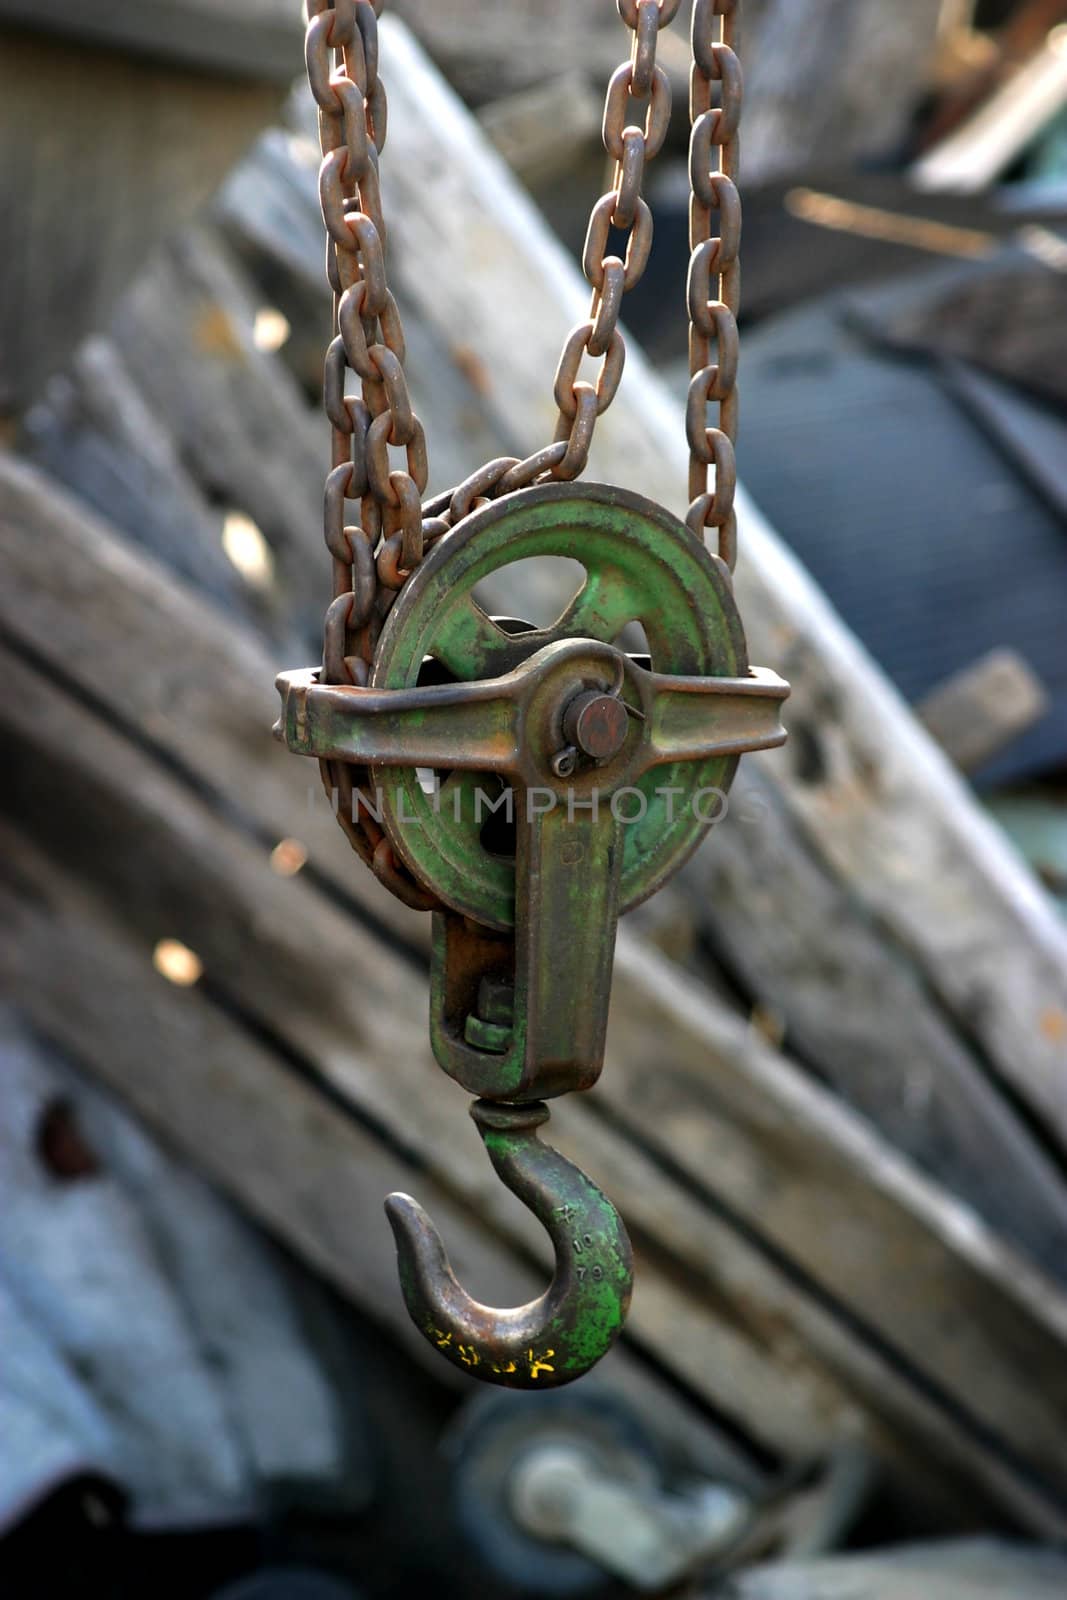 A block and tackle in a junk yard.